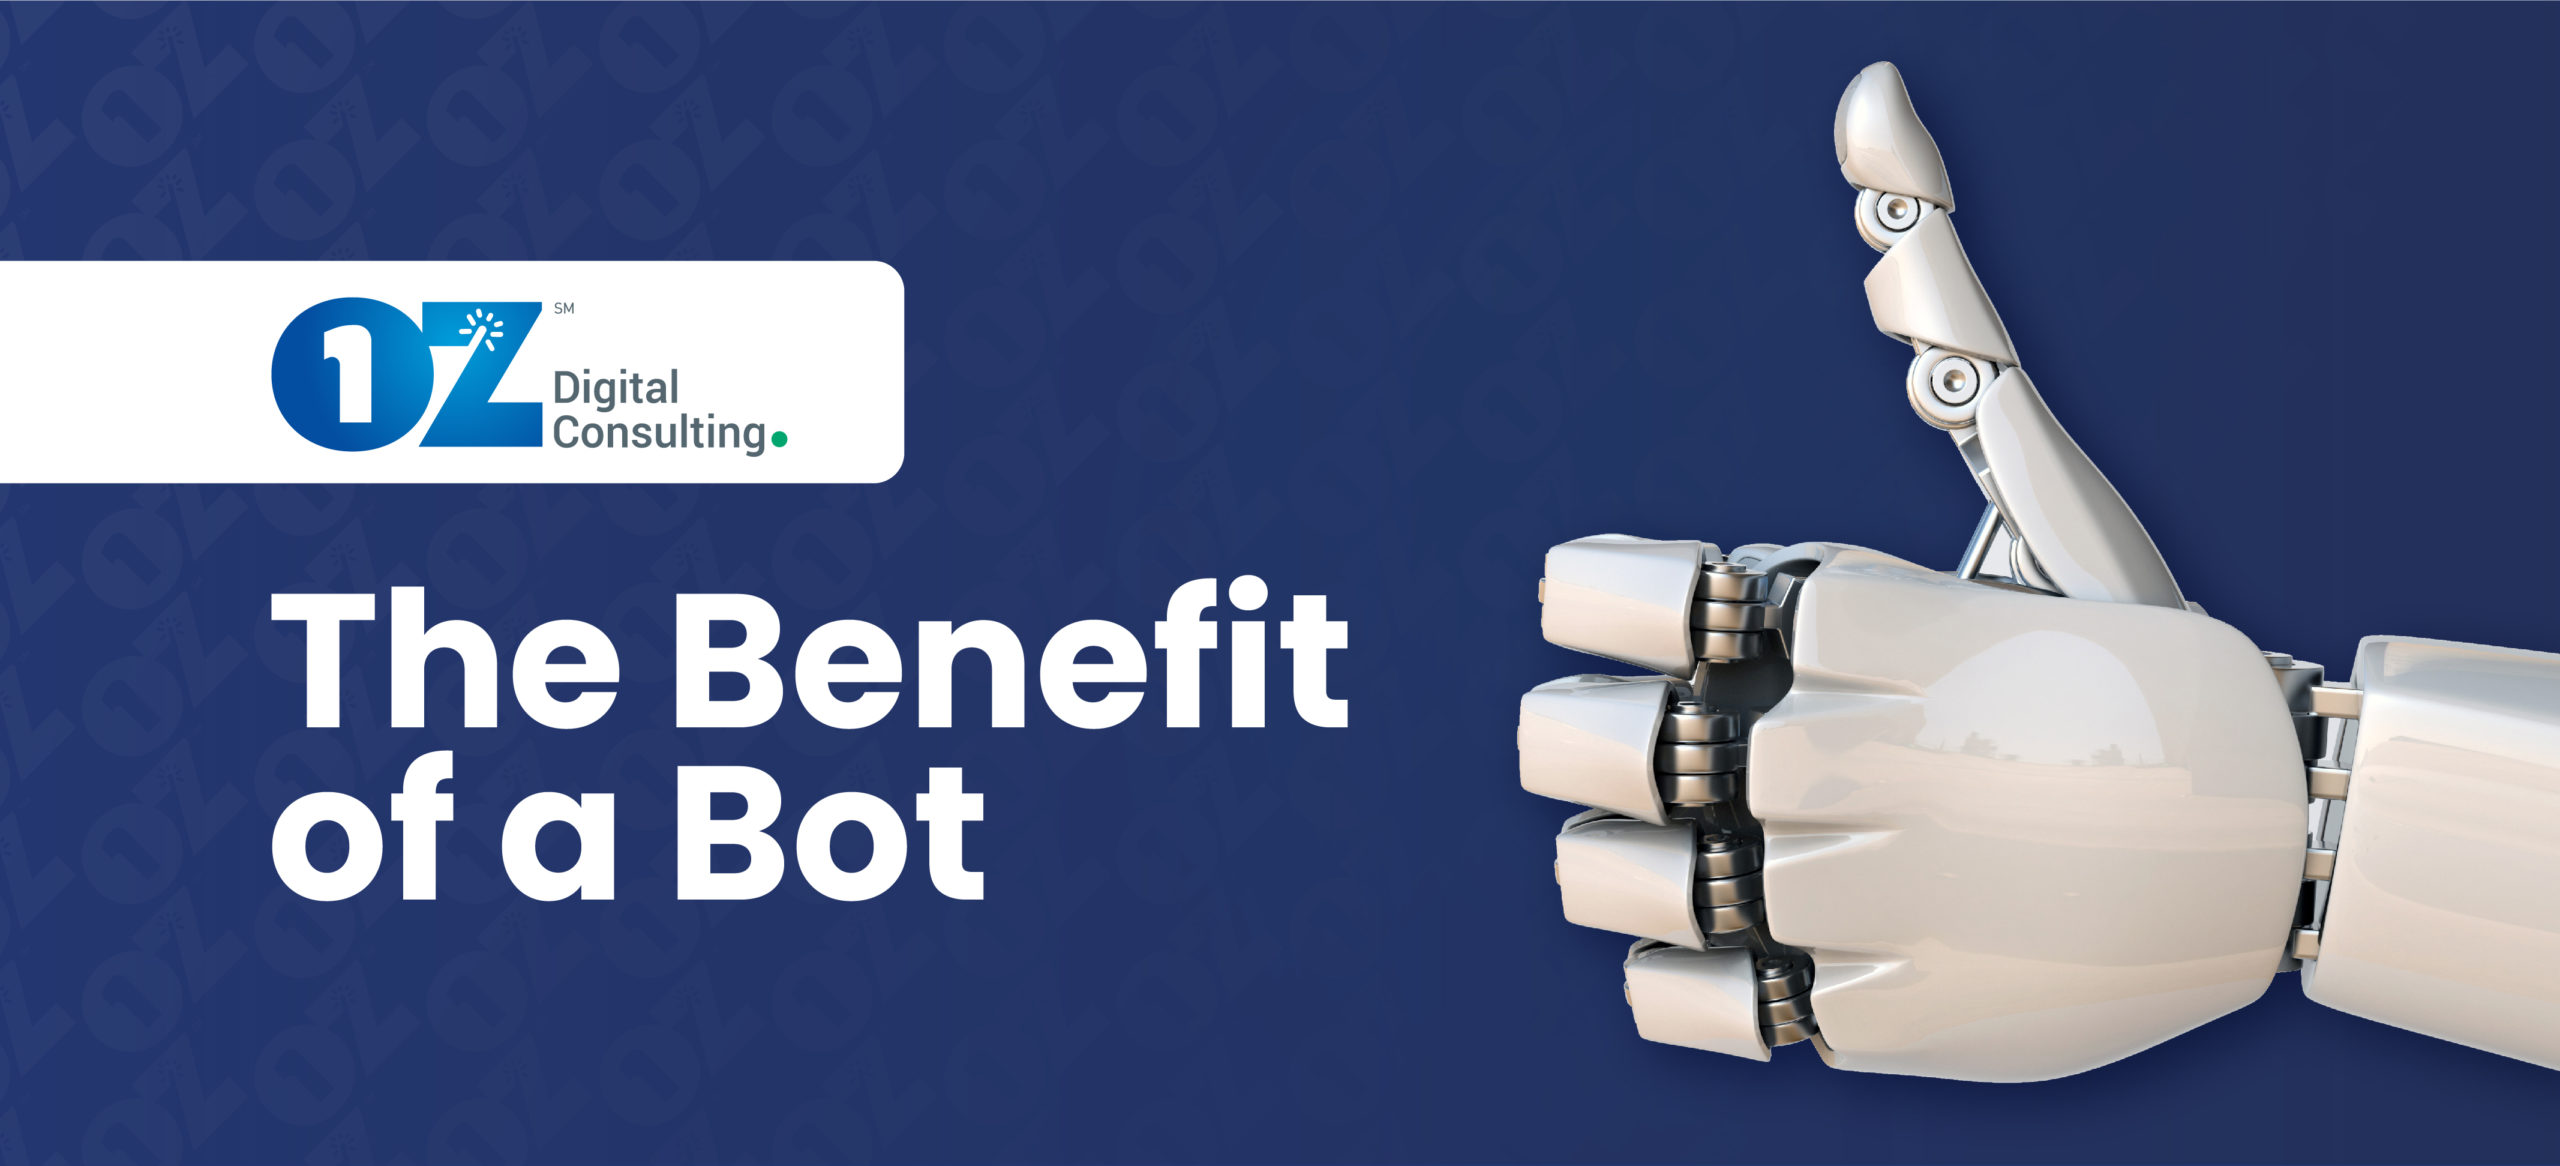 Oz Digital Consulting The Benefit of a Bot-01